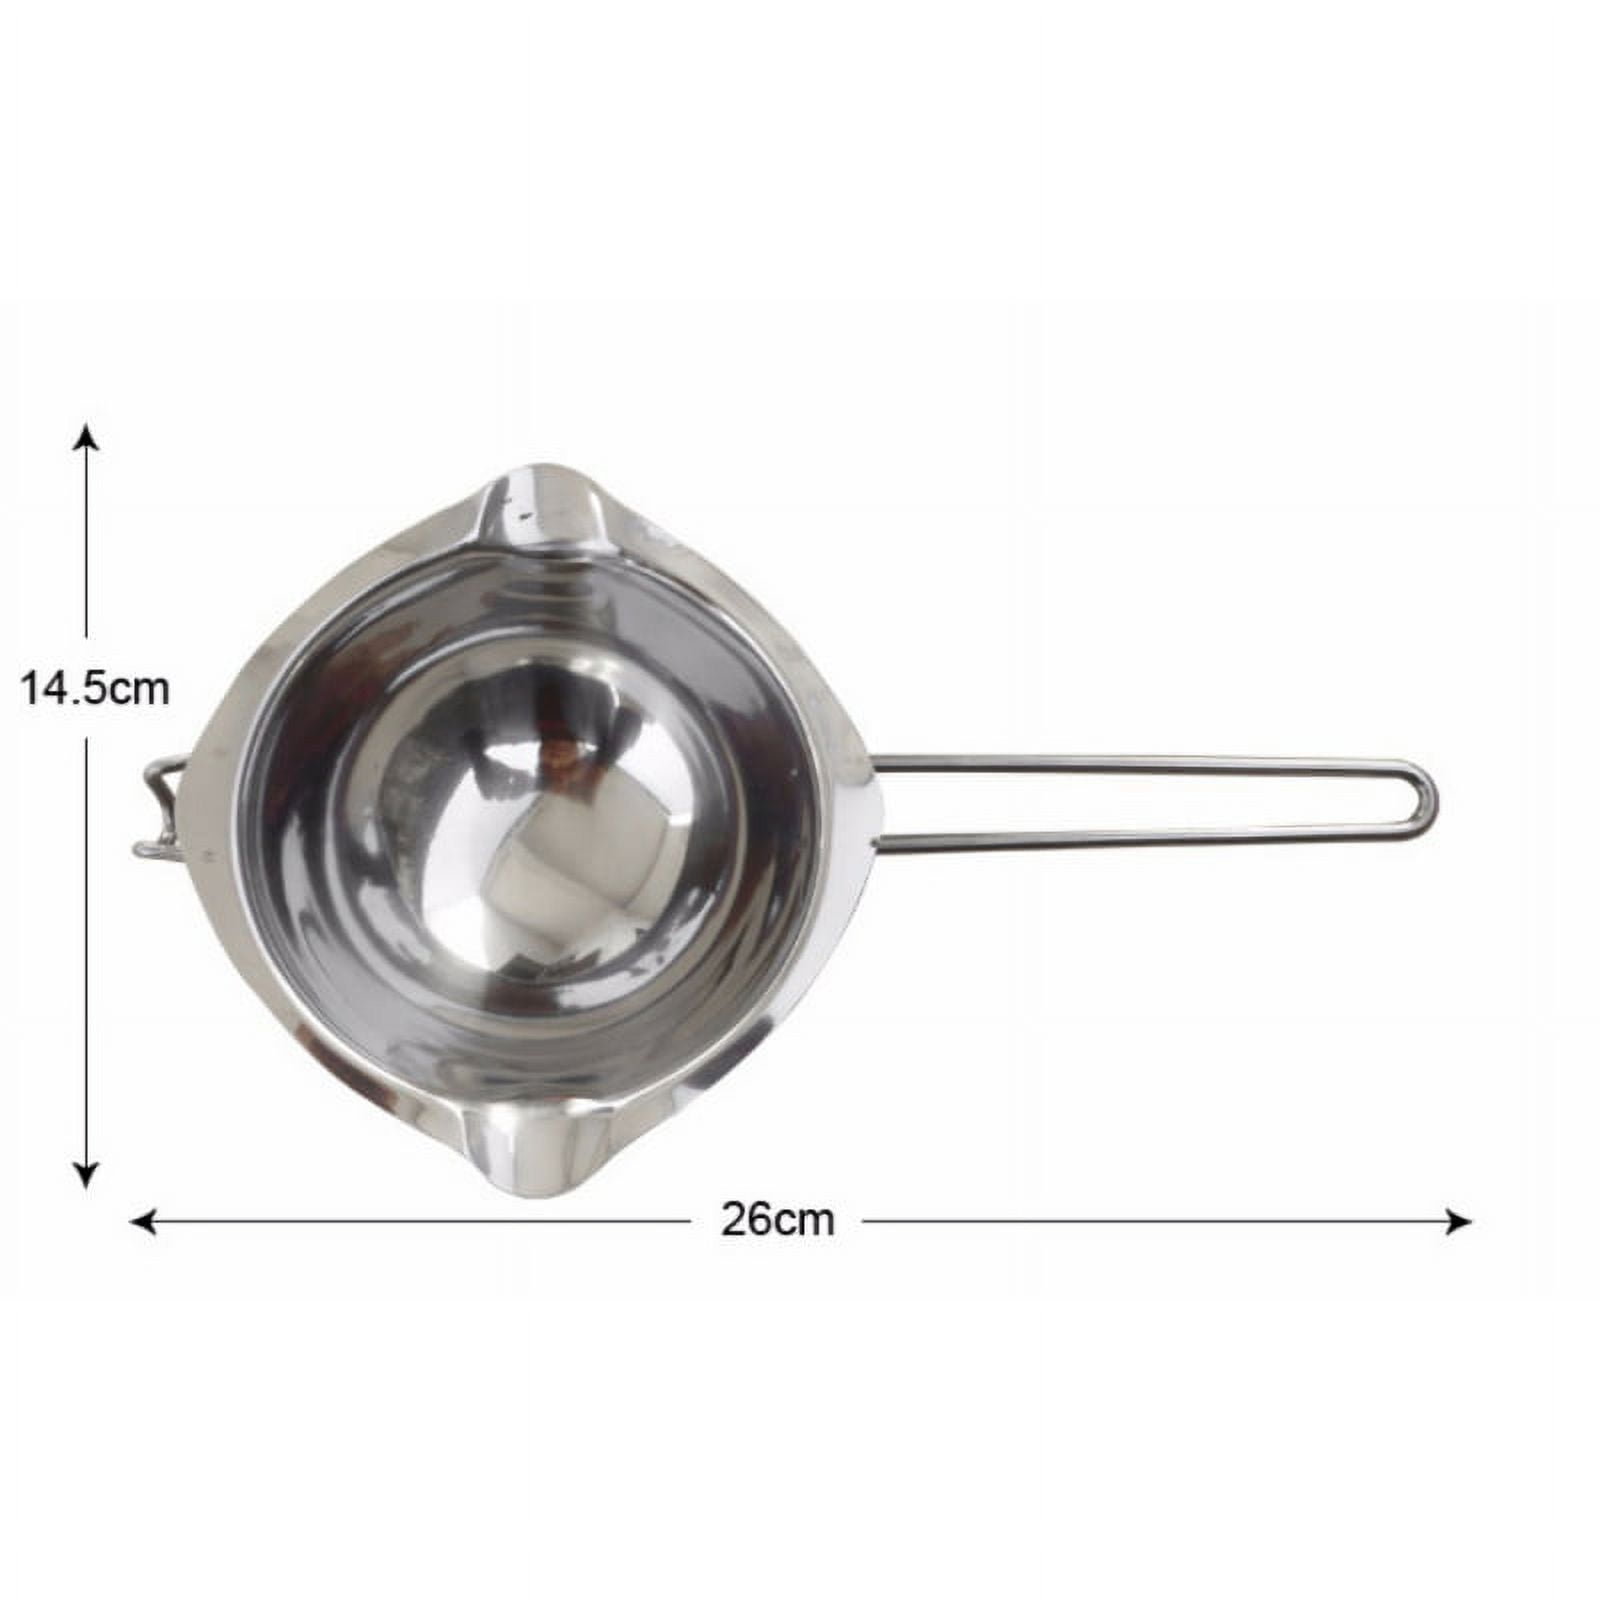 Gonioa Stainless Steel Double Boiler Melting Pot, Chocolate